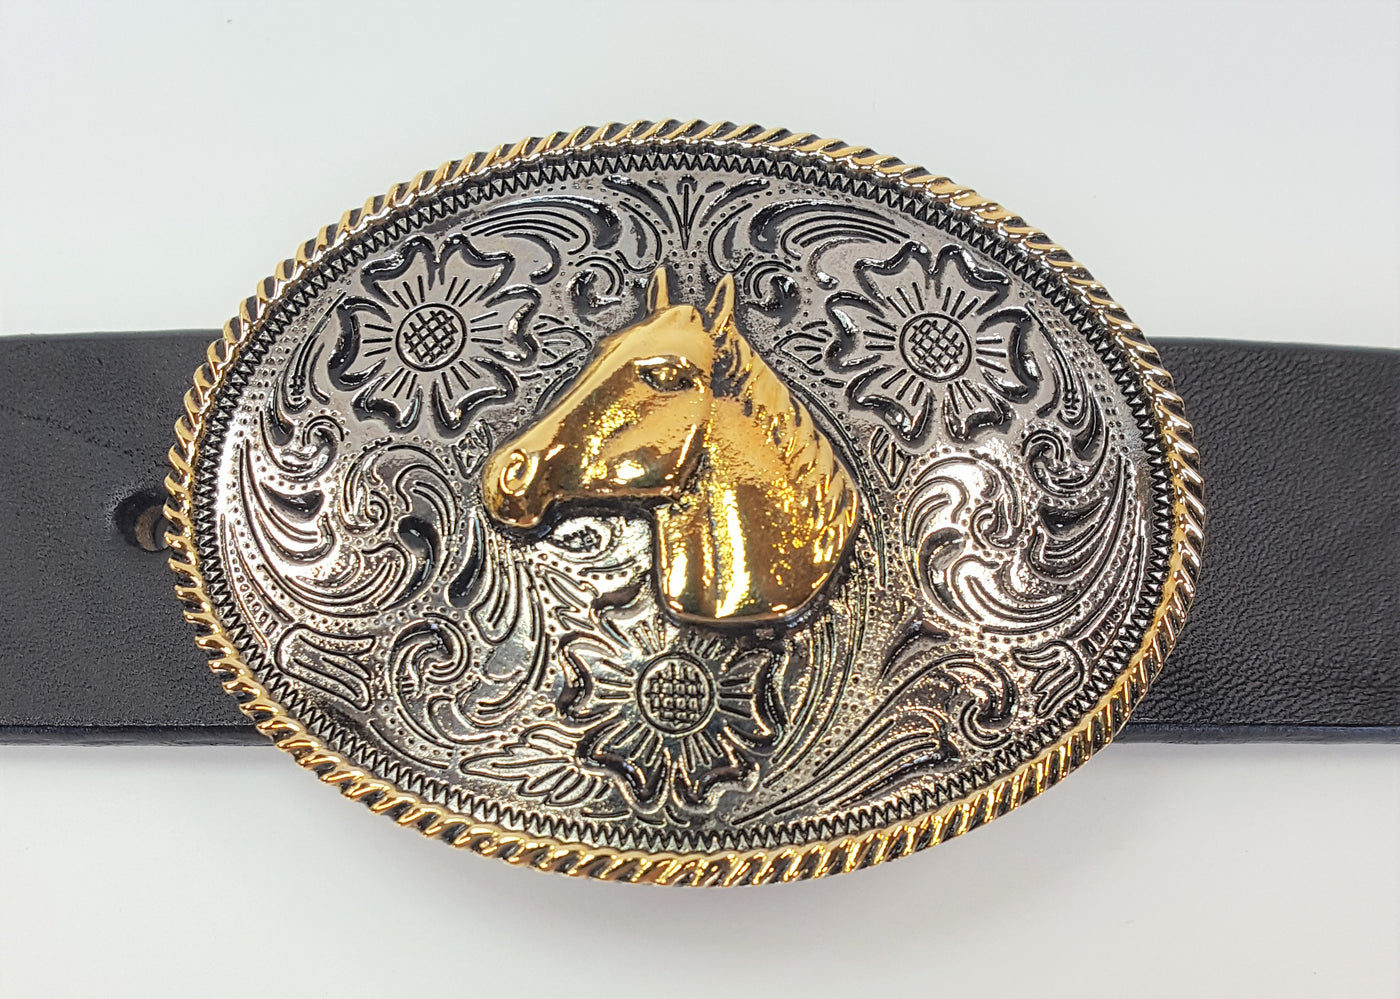 Horsehead buckle by AndWest pictures a chrome colored background with Western scroll and flowered pattern.  Edge of the oval buckle has gold colored rope pattern along the edge and horse head is gold colored and centered on buckle. Works great for child's belt or adult who wants a smaller buckle Fits belt widths up to 1 1/4" Dimensions are 2 3/8" tall by 3 1/4" wide Available in our online store and also in the retail shop in Smyrna, TN, just outside of Nashville. Pictured on black leather belt.